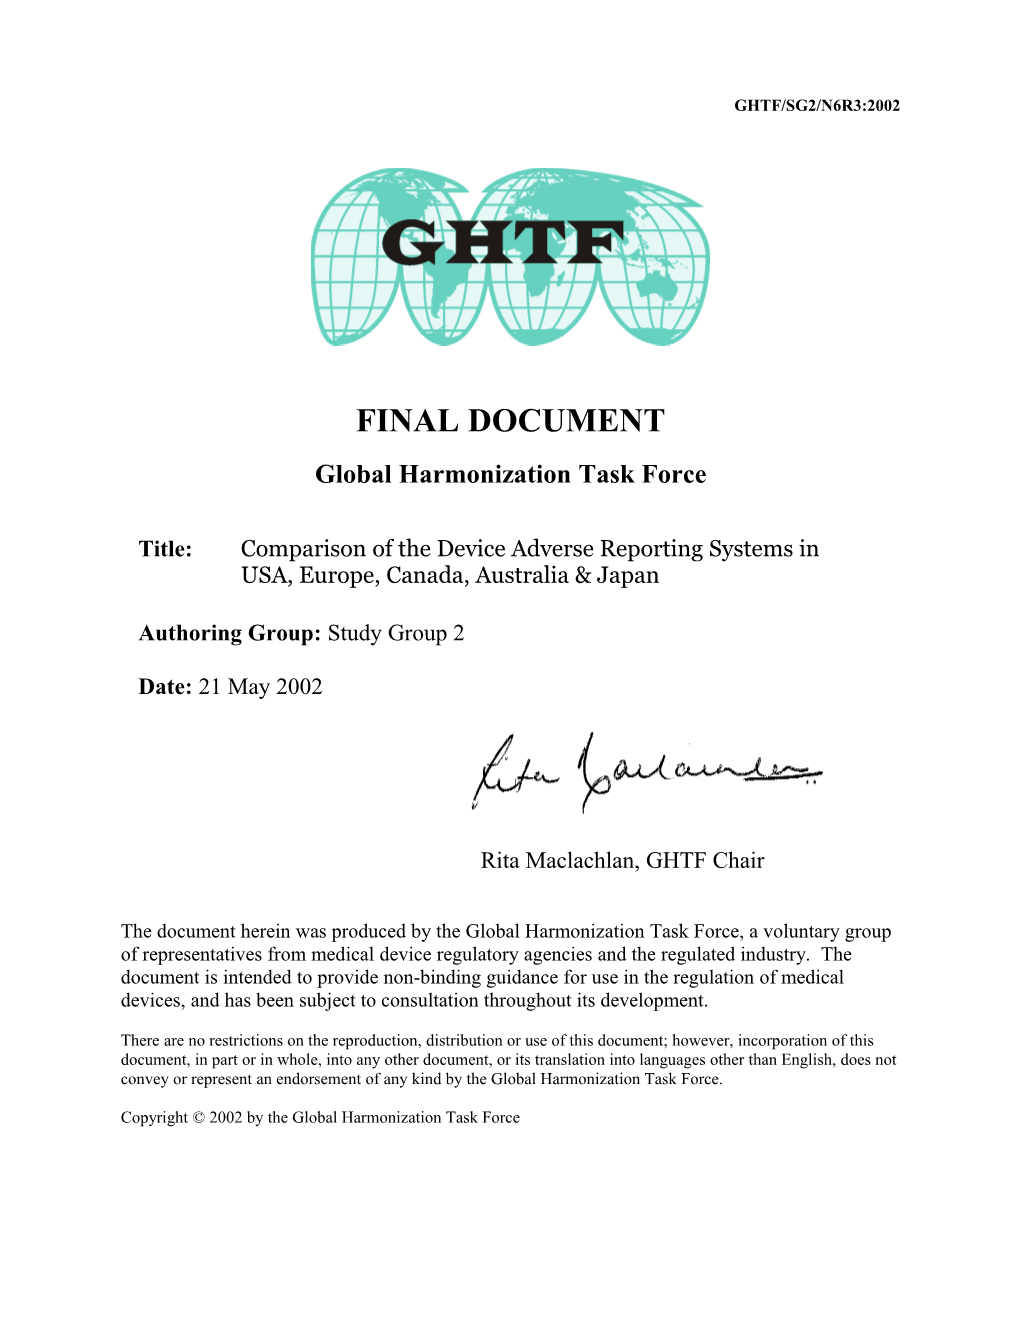 GHTF SG2 - Comparison Of The Device Adverse Reporting Systems - May 2002